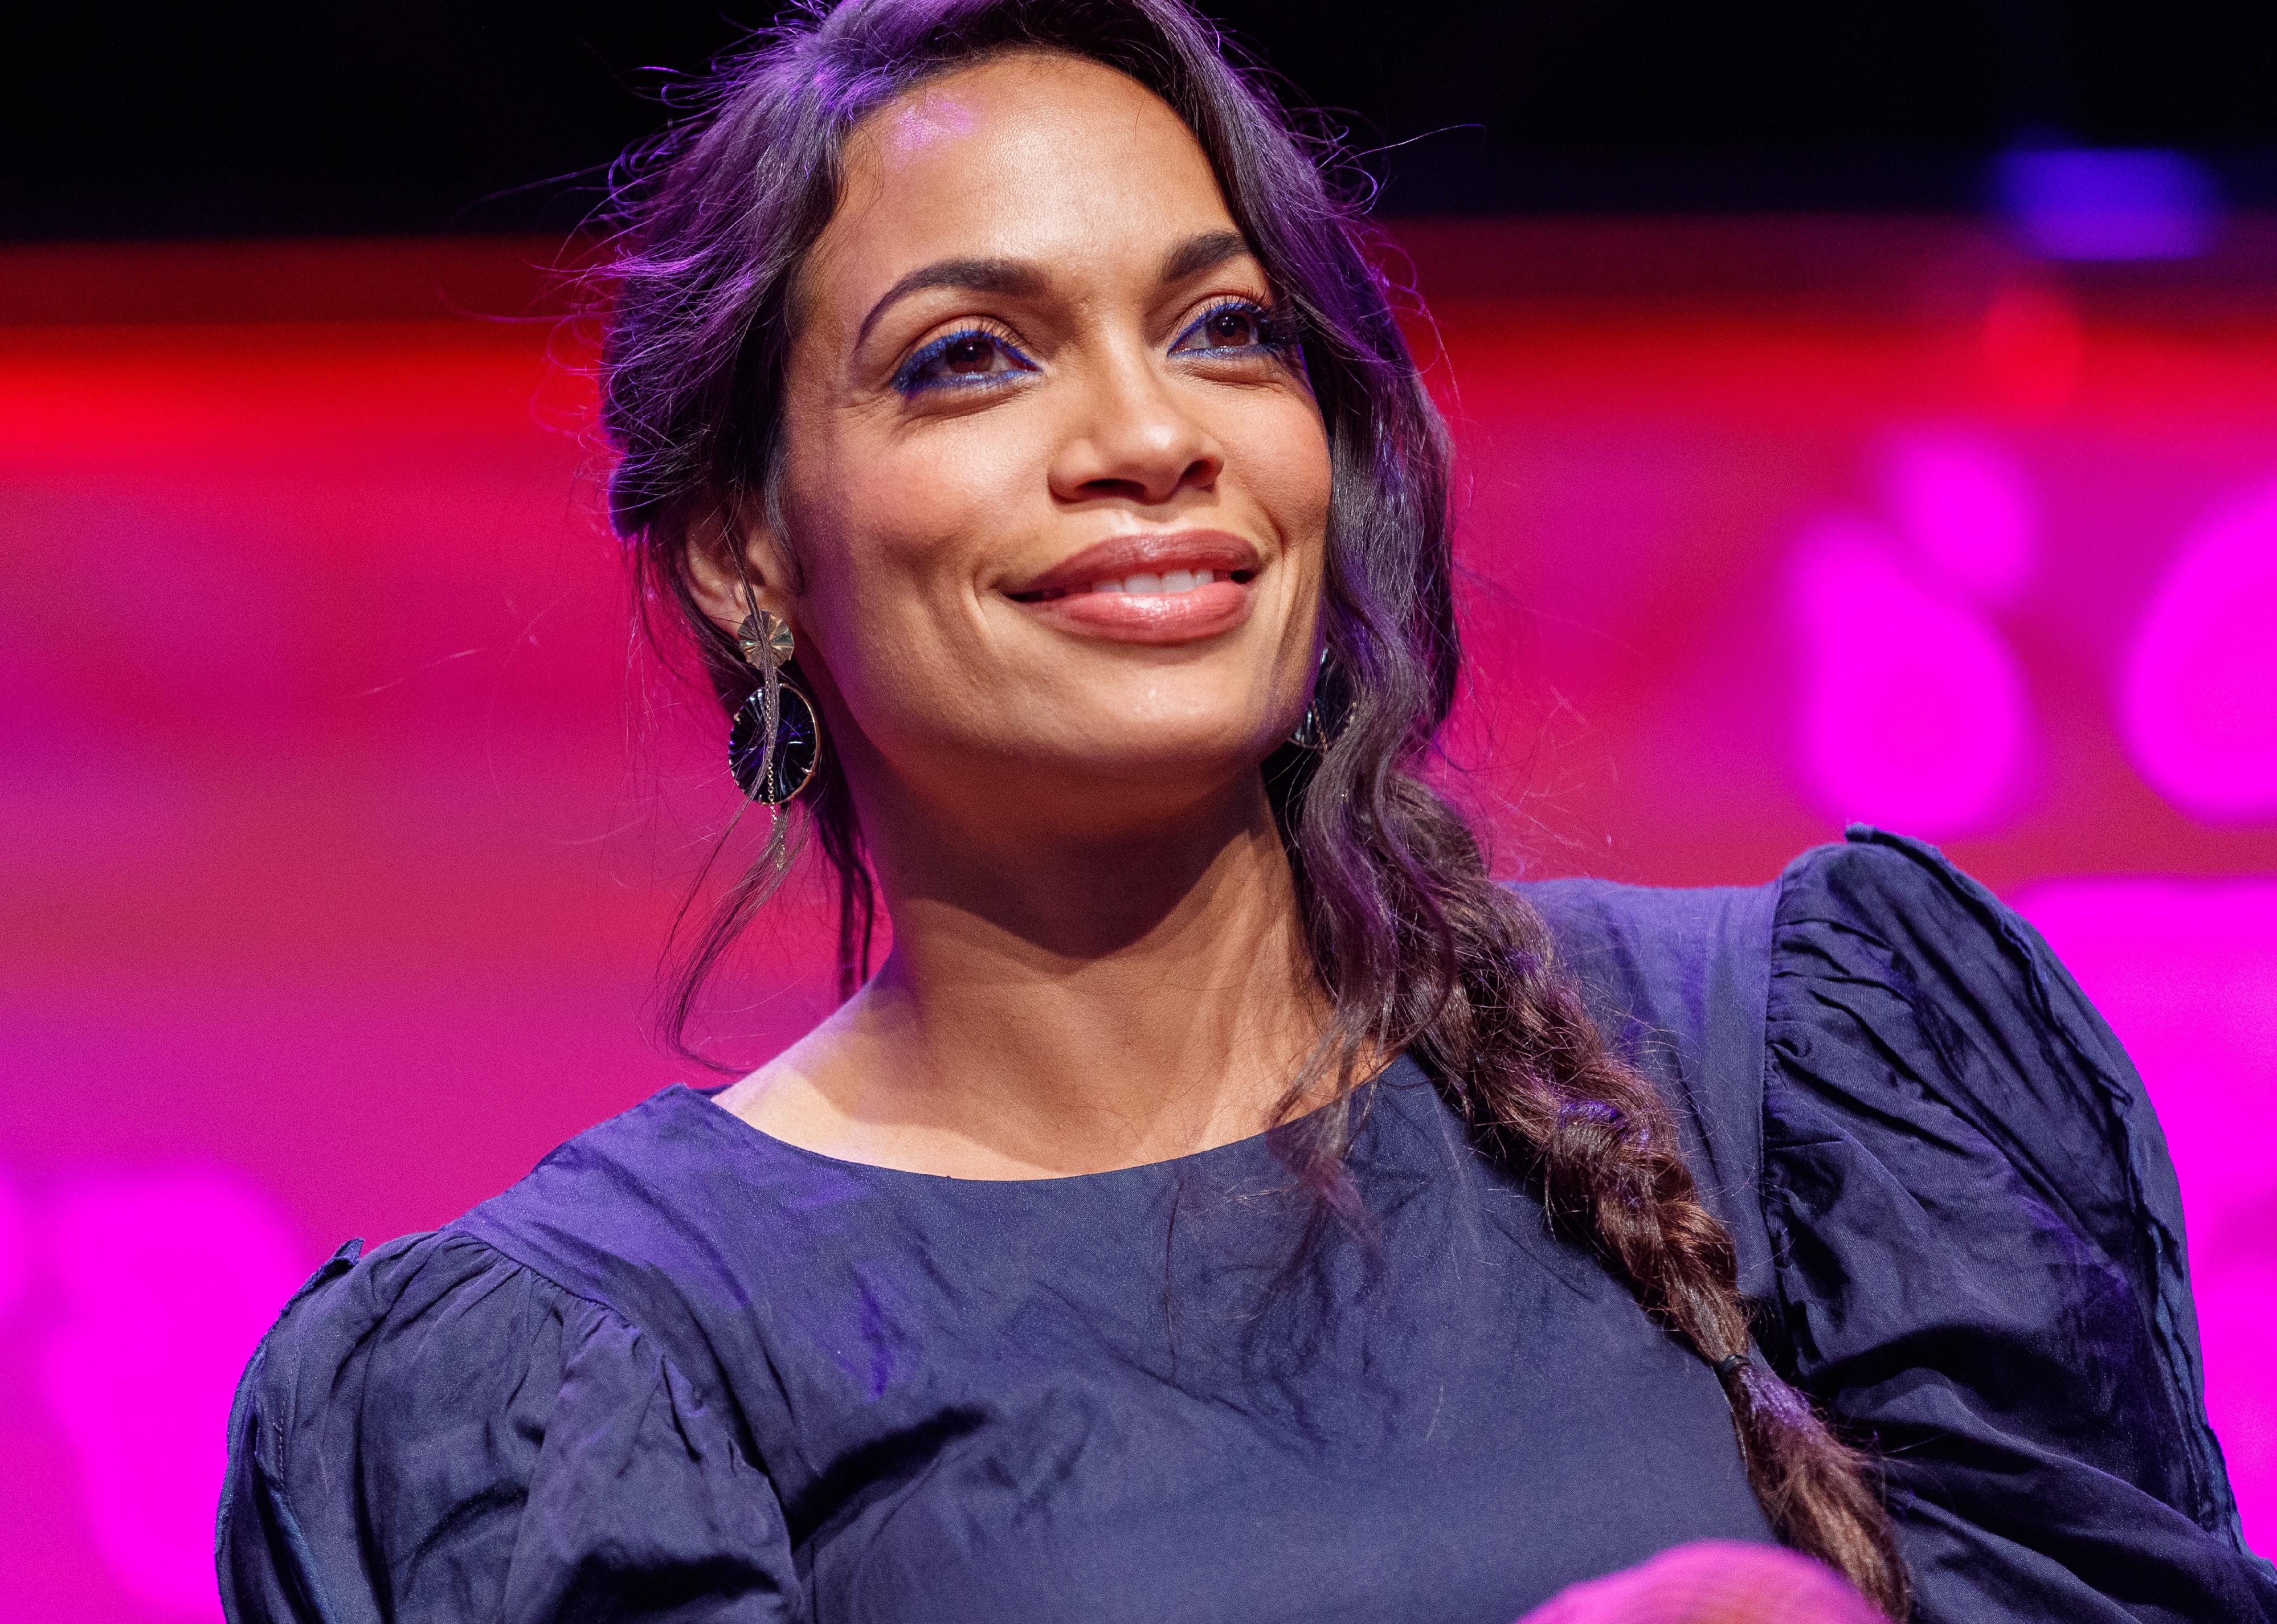 Rosario Dawson in black in front of a pink background.